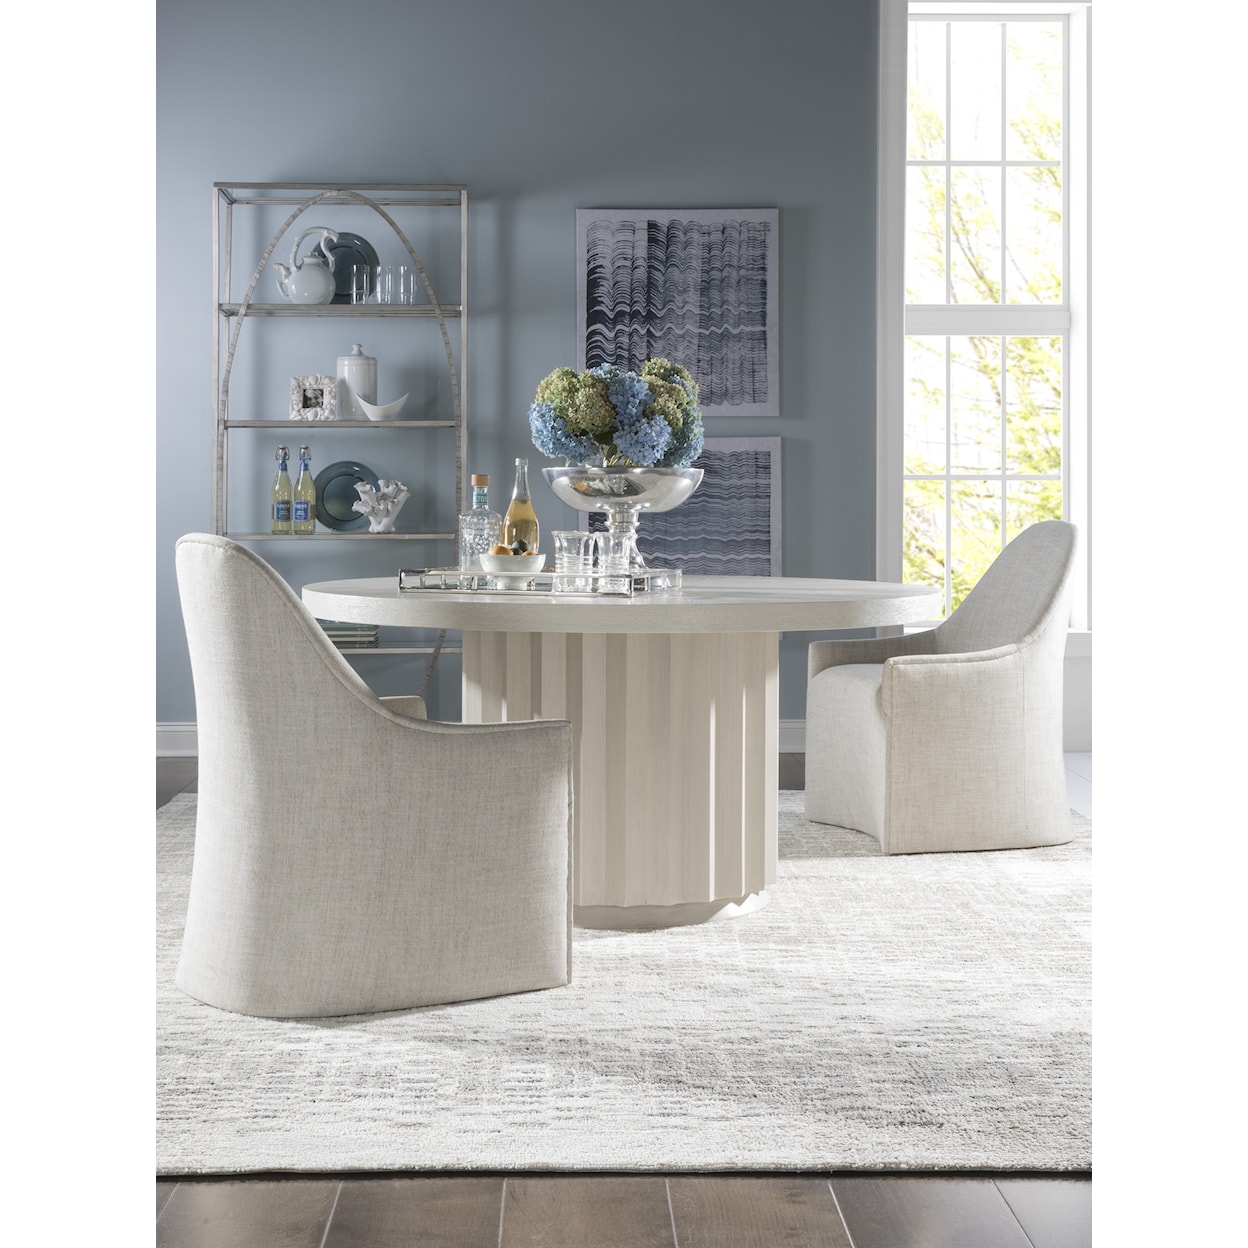 Artistica Lily Upholstered Dining Side Chair